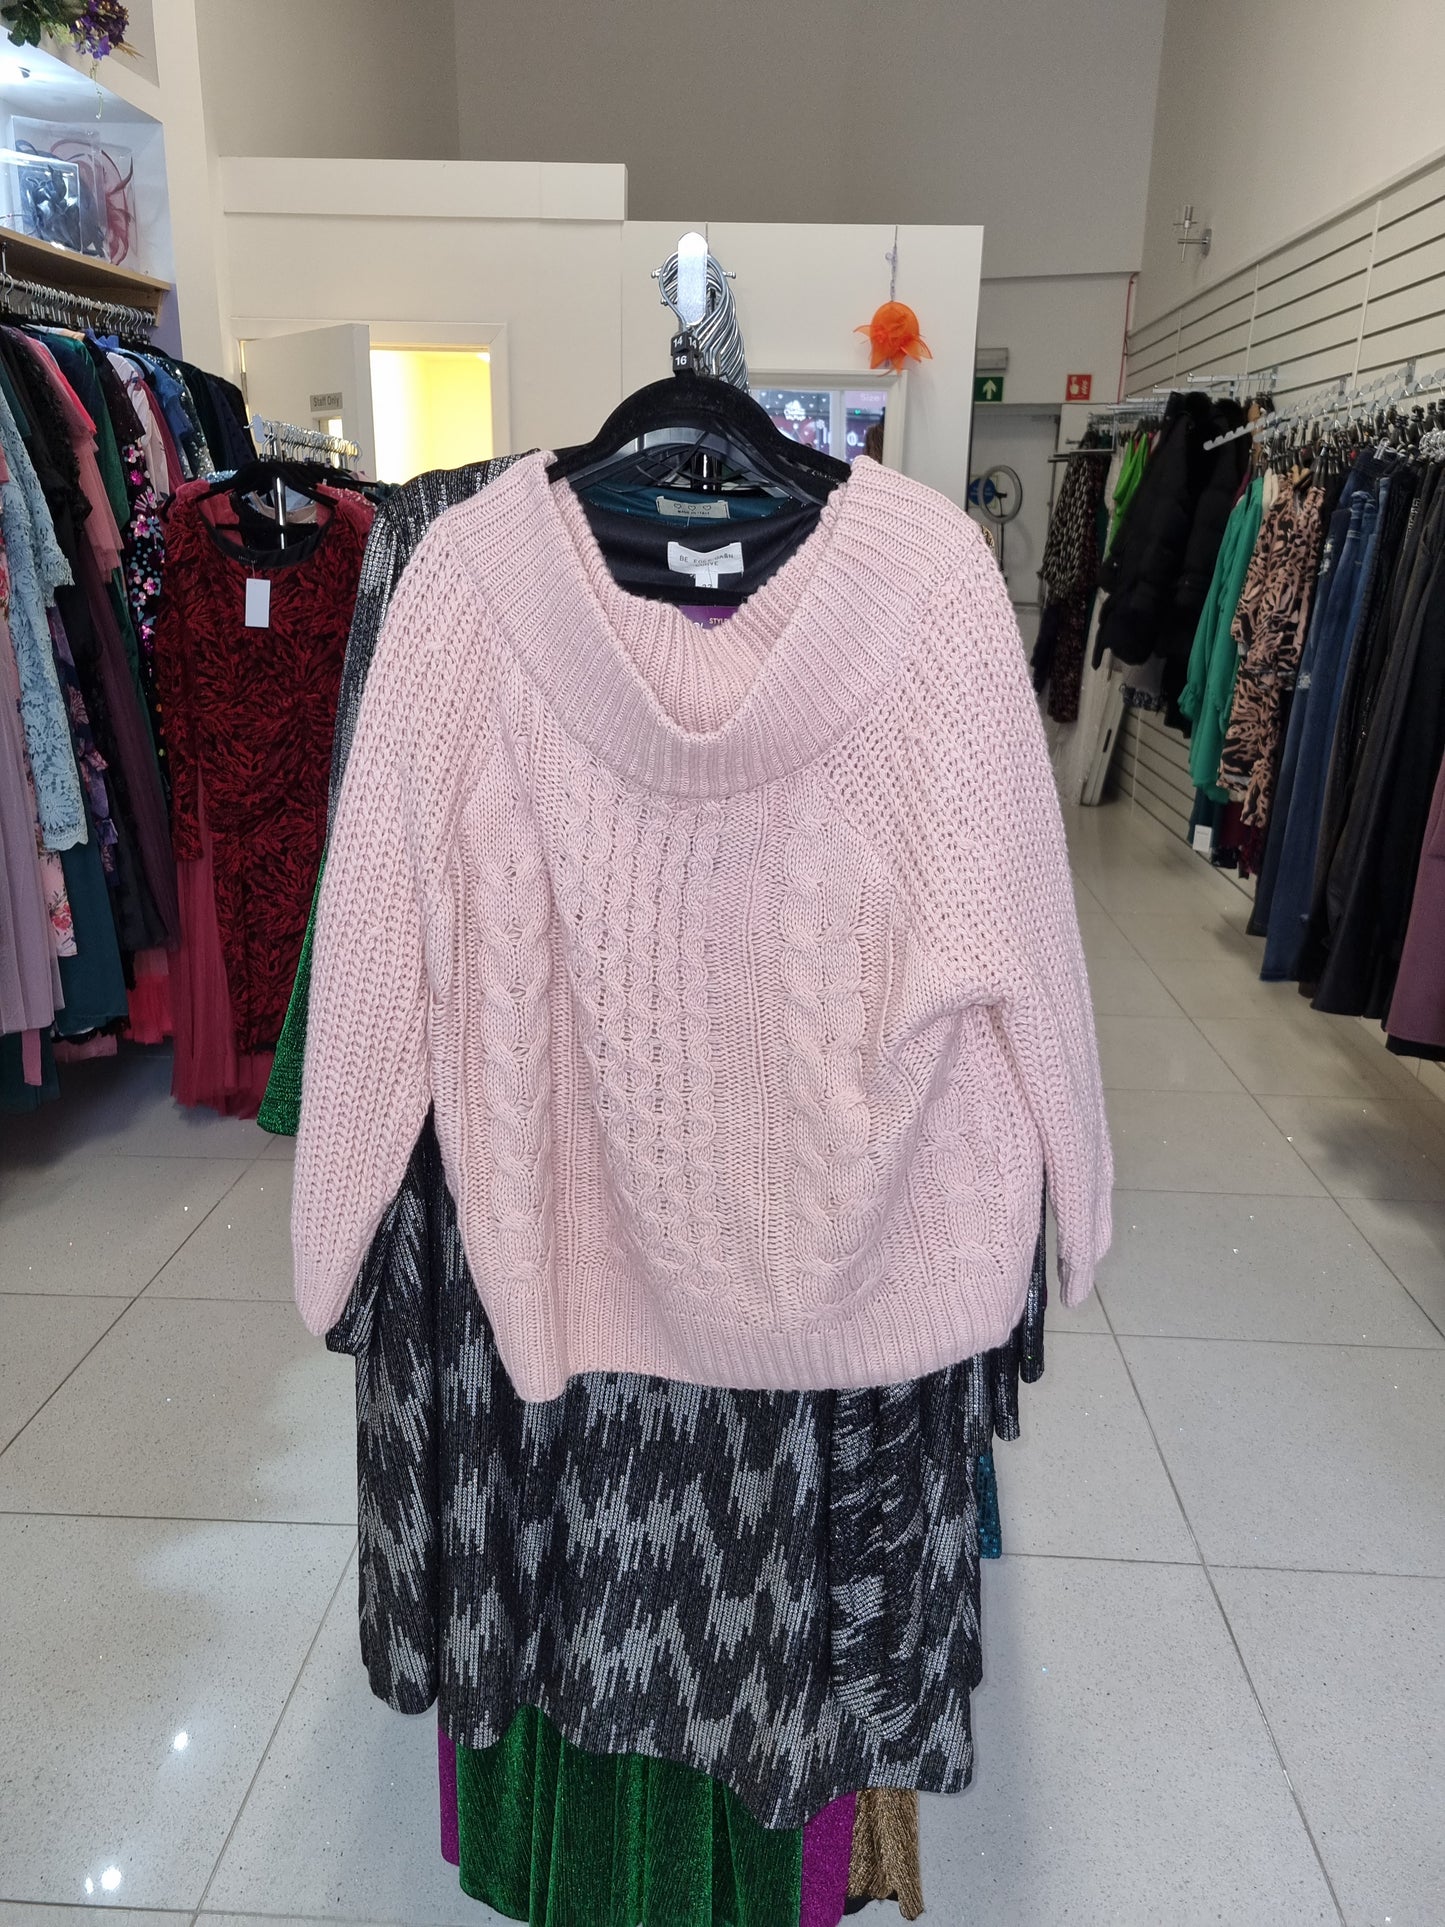 Pink Cable Knit Jumper